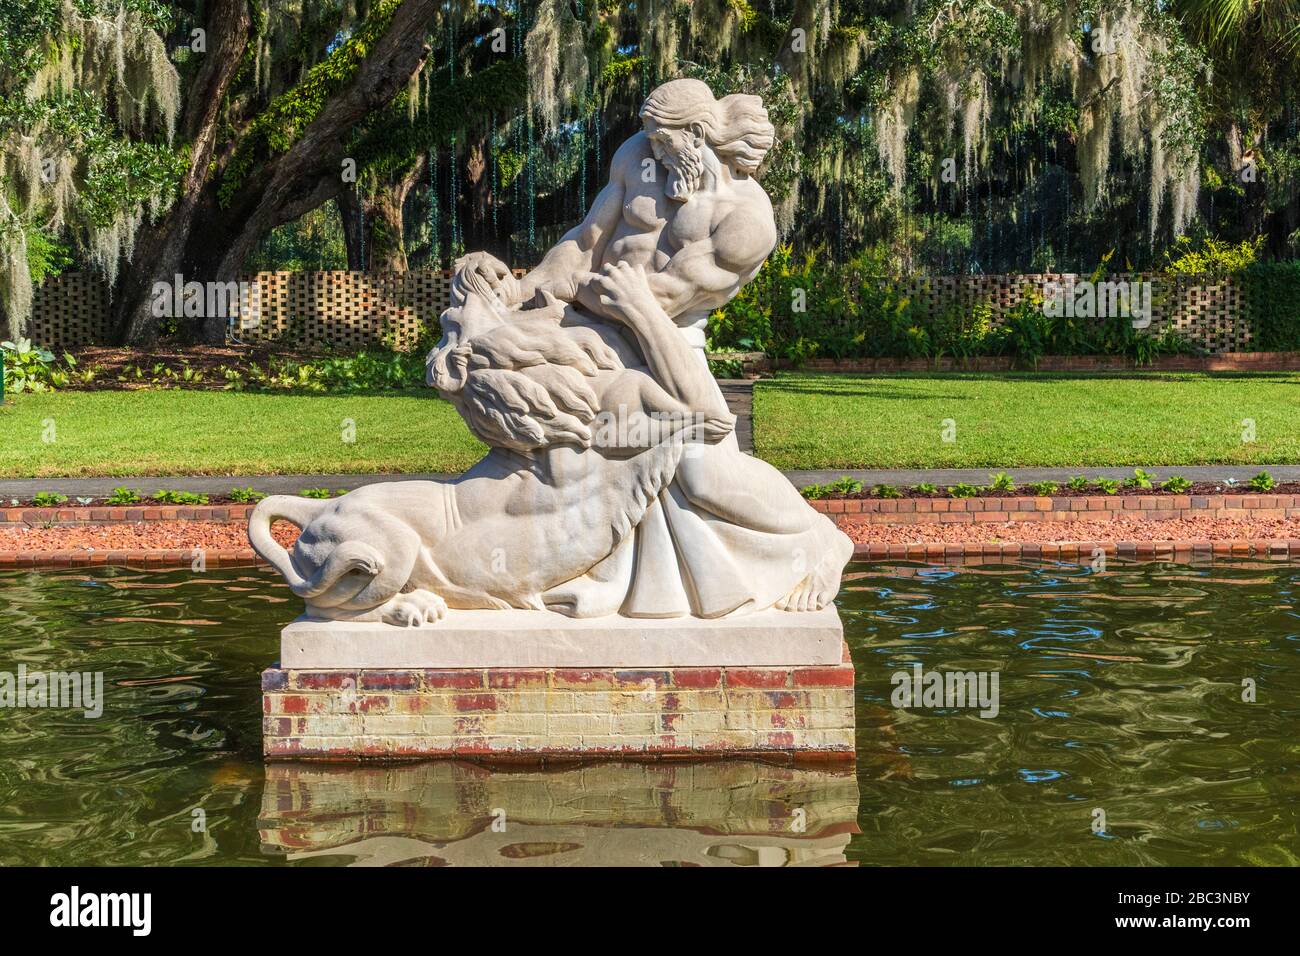 Samson and the Lion sculpture in Brookgreen Gardens in South Carolina. Stock Photo